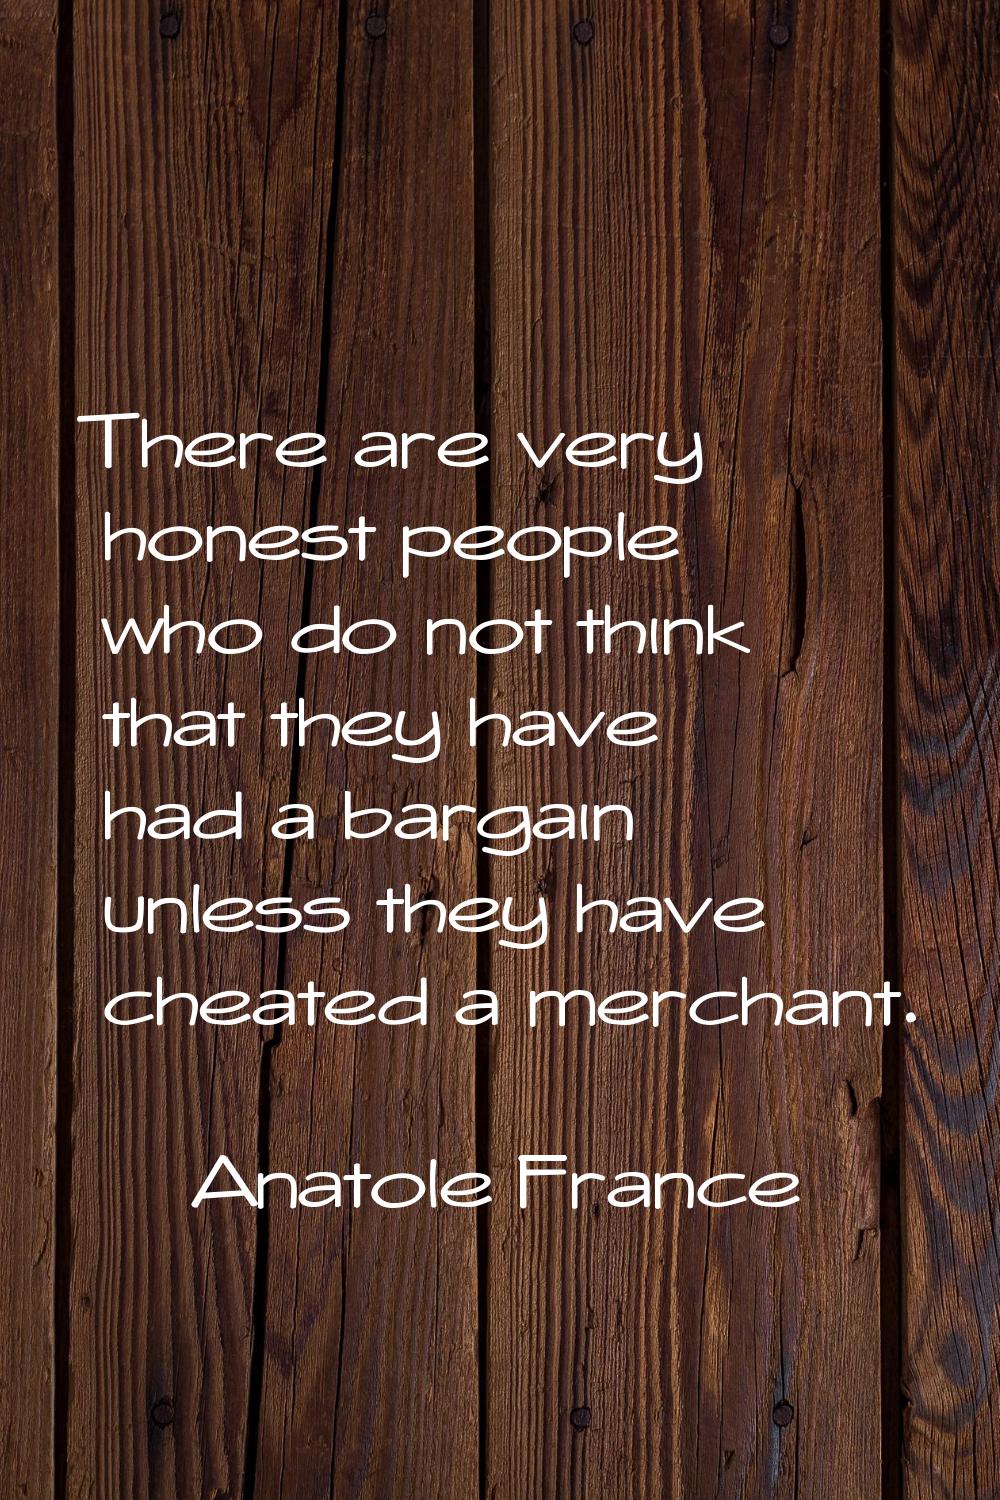 There are very honest people who do not think that they have had a bargain unless they have cheated